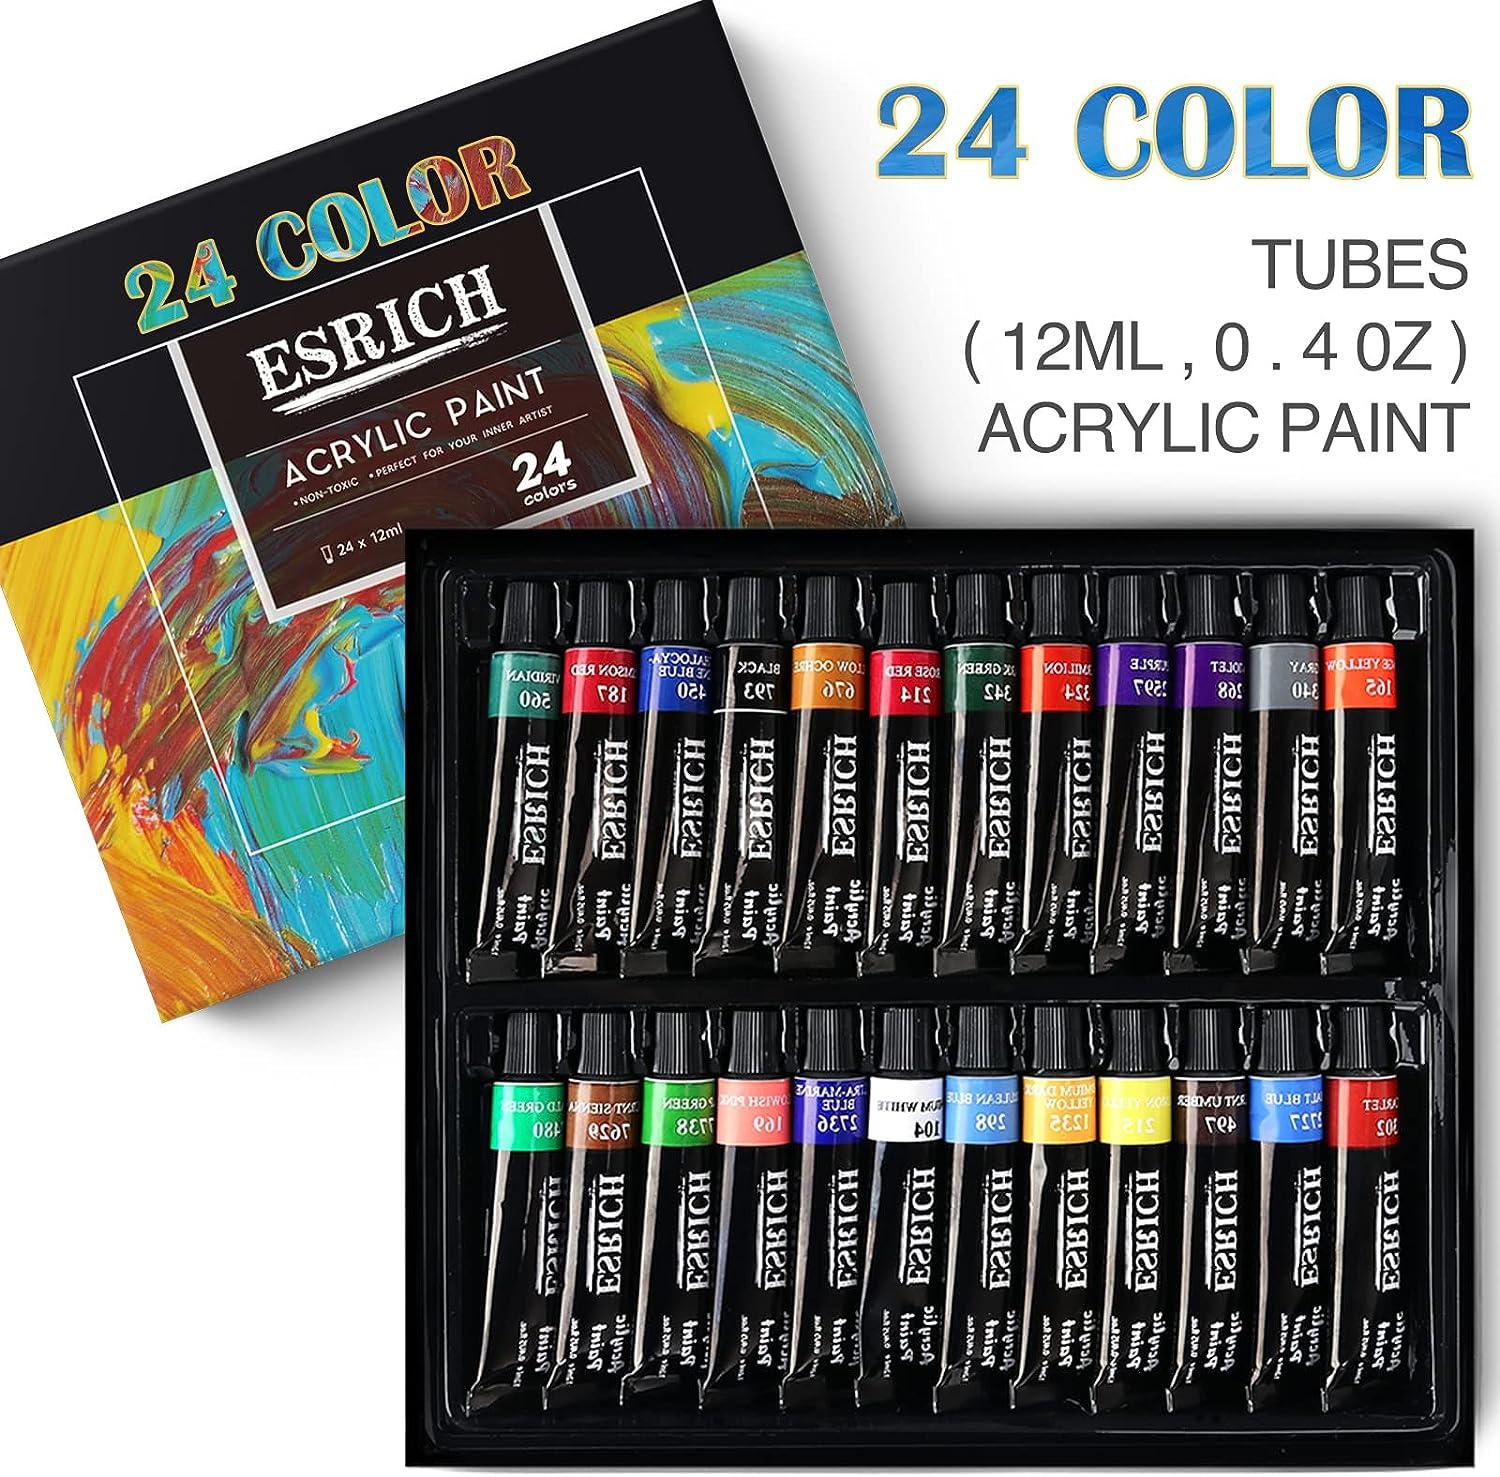 Acrylic Painting Sets for Beginners